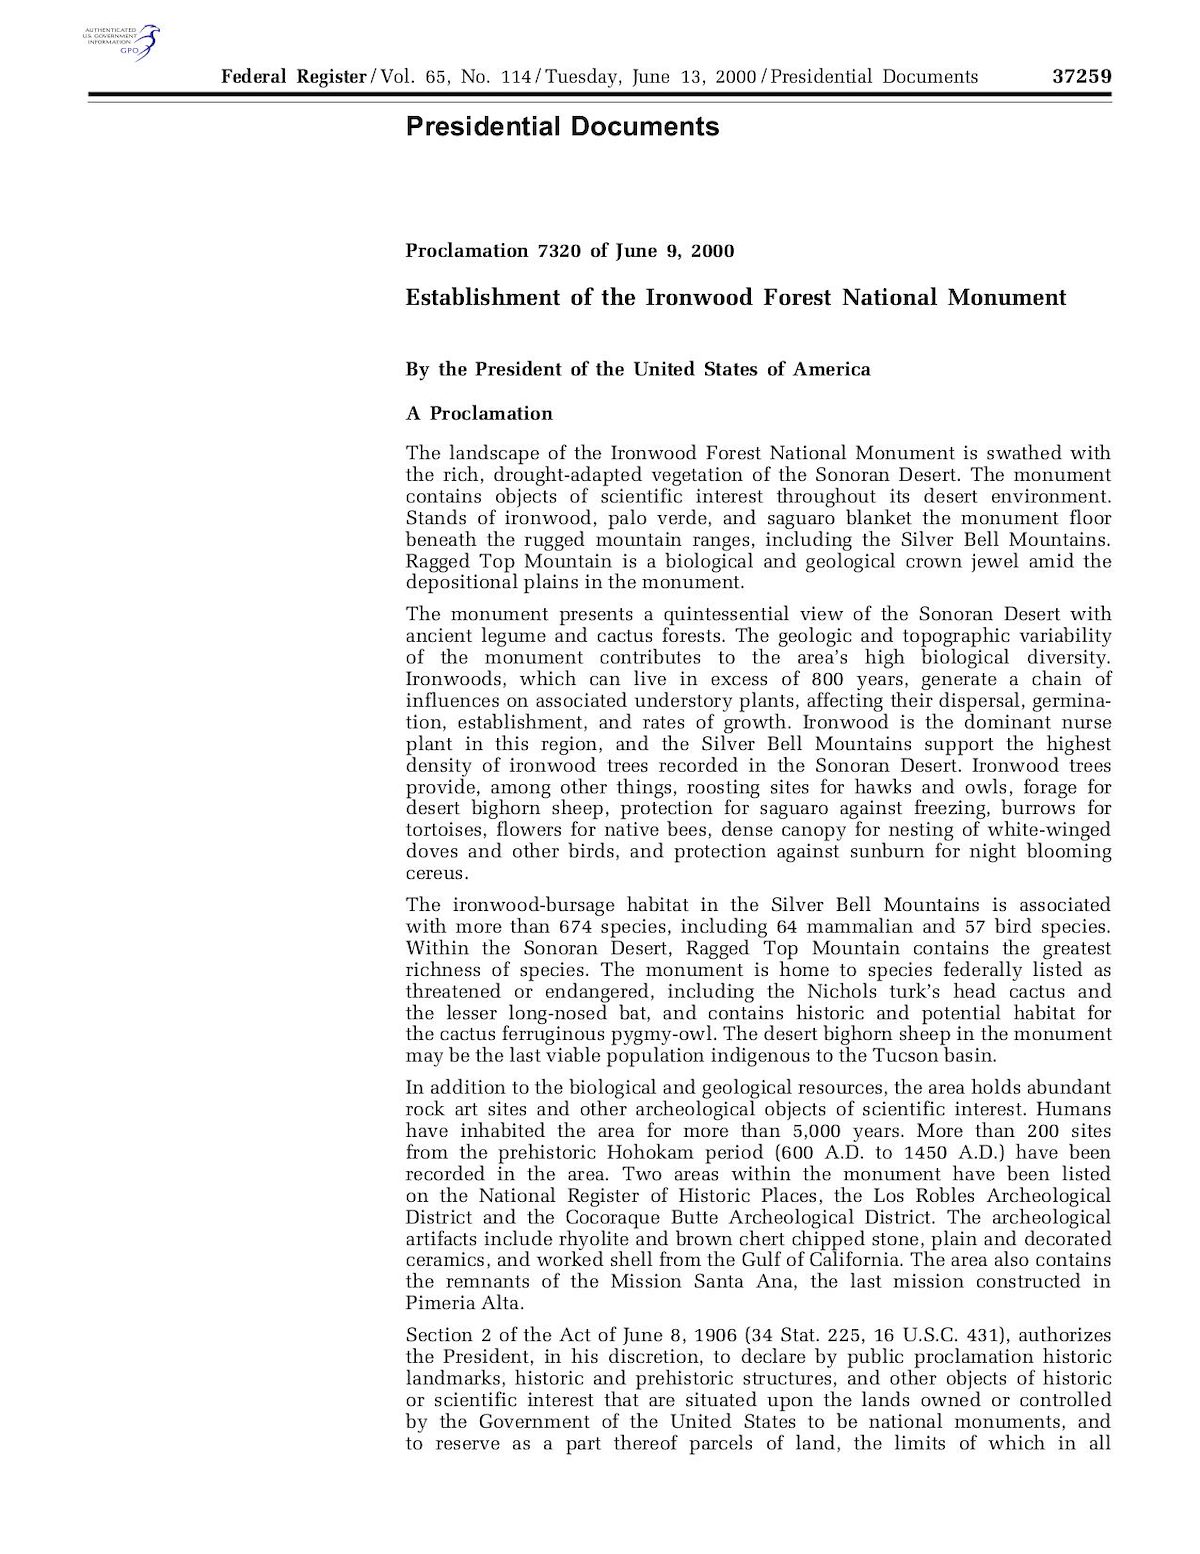 Presidential Proclamation 7320 Establishing Ironwood Forest National Monument Cover Page